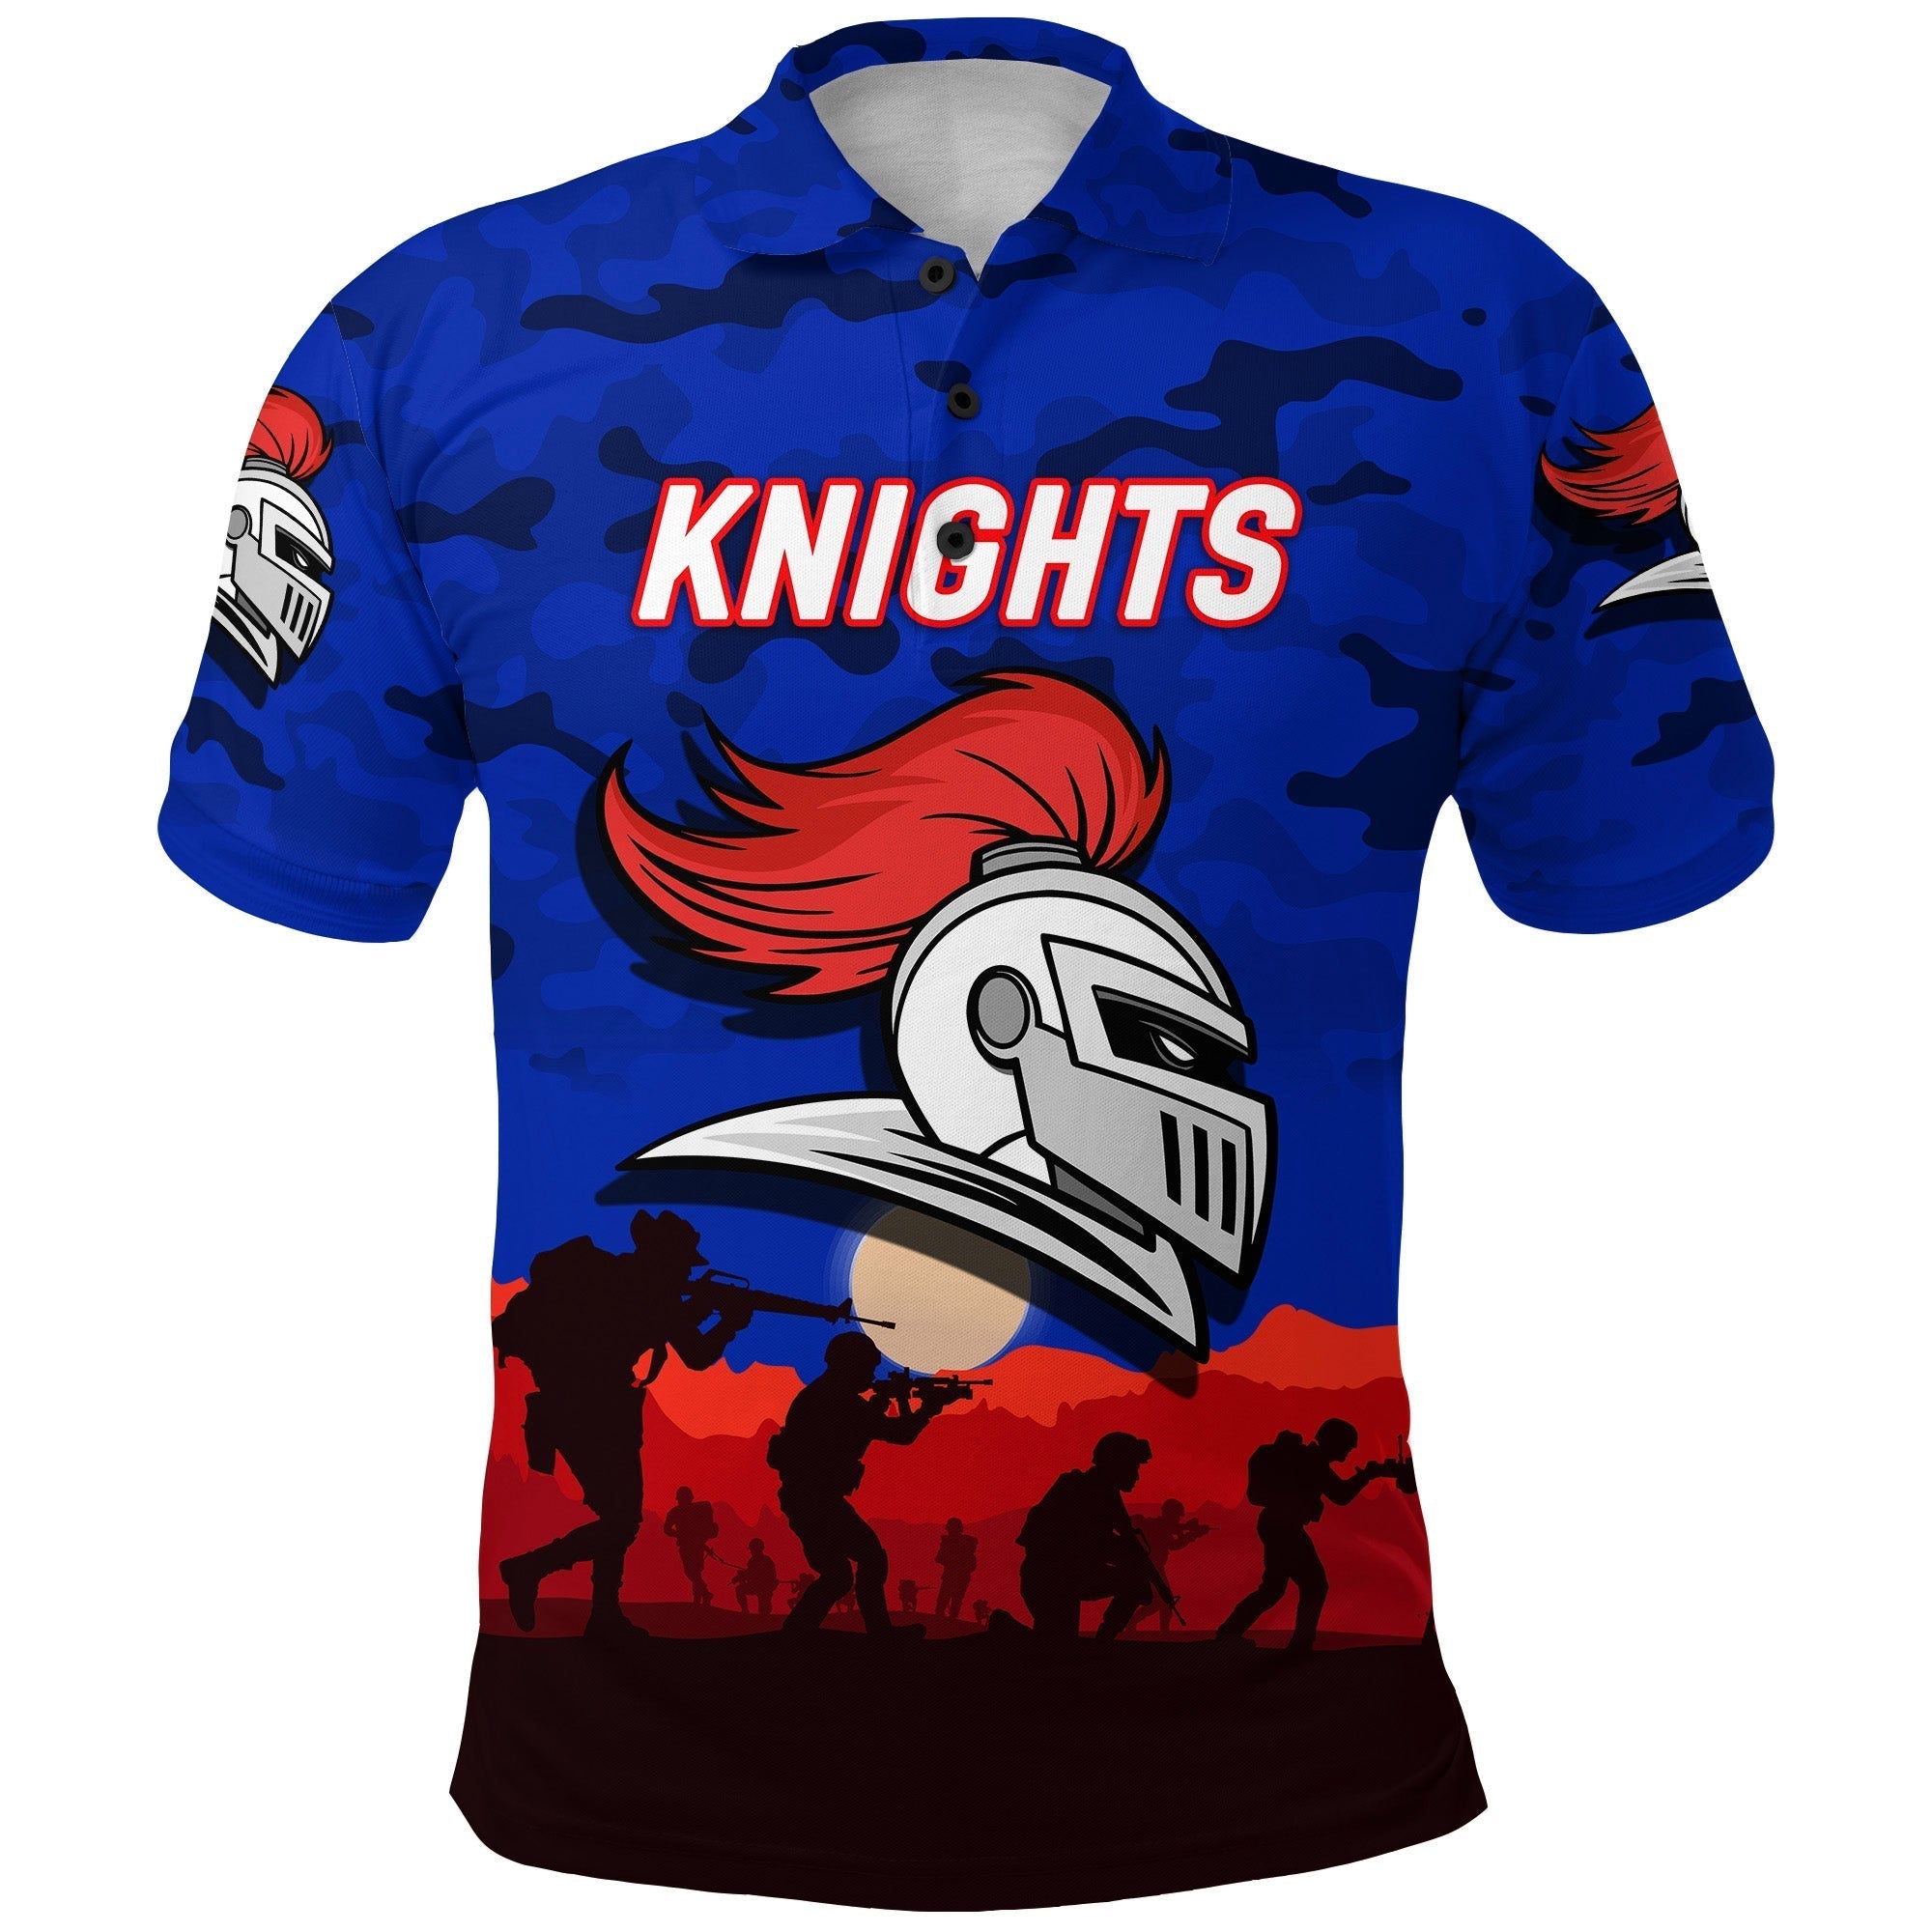 knights-anzac-polo-shirt-simple-style